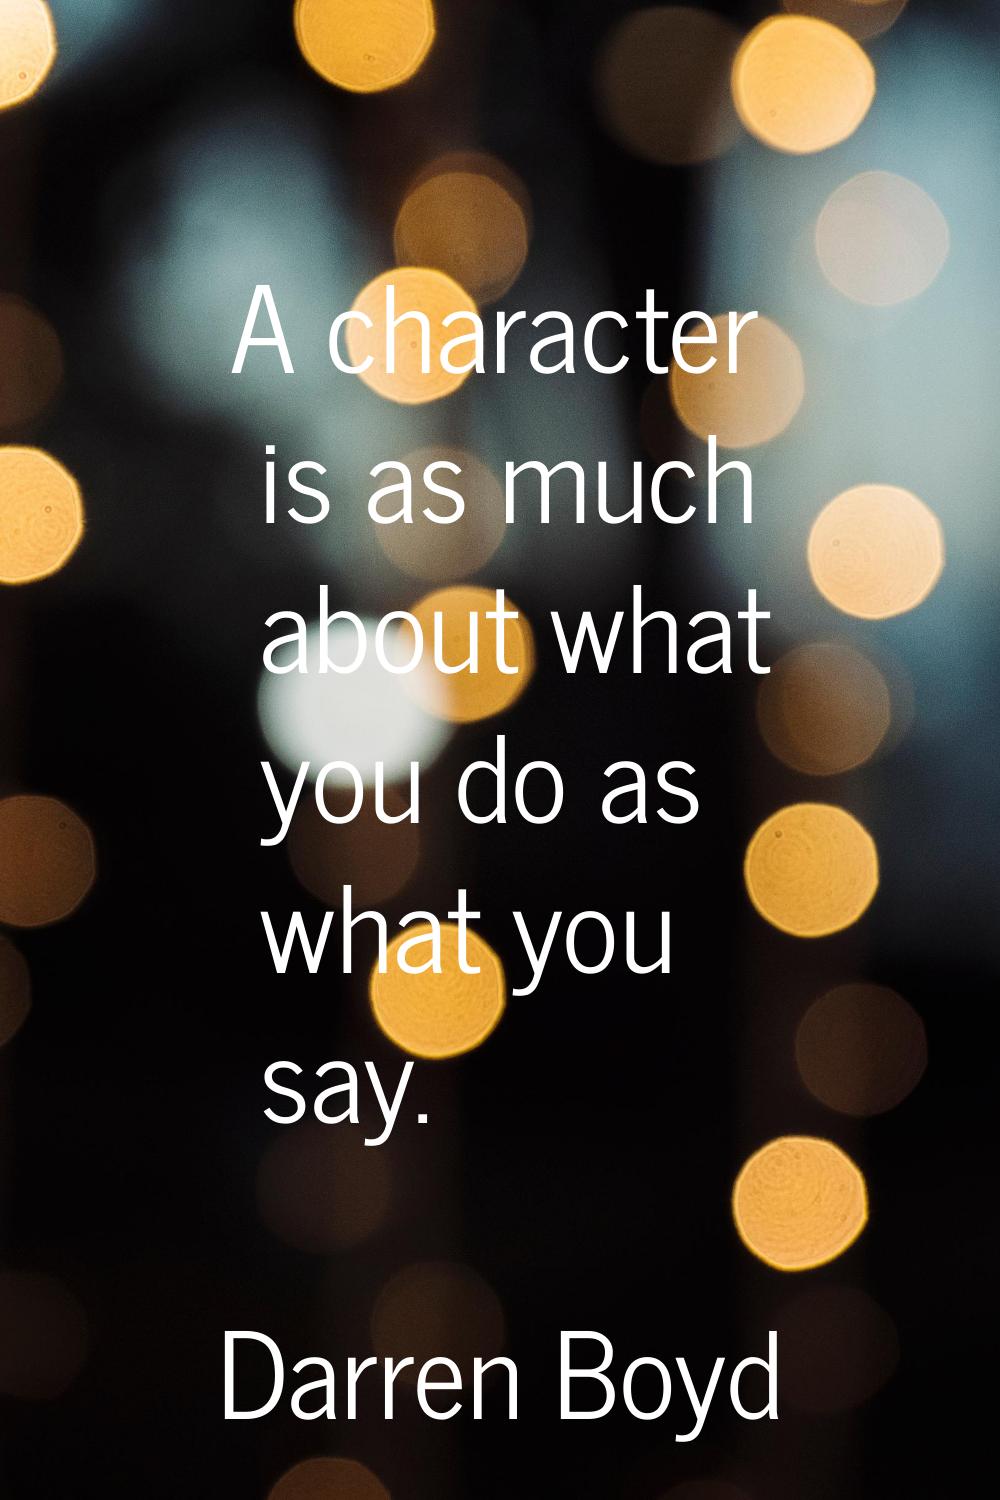 A character is as much about what you do as what you say.